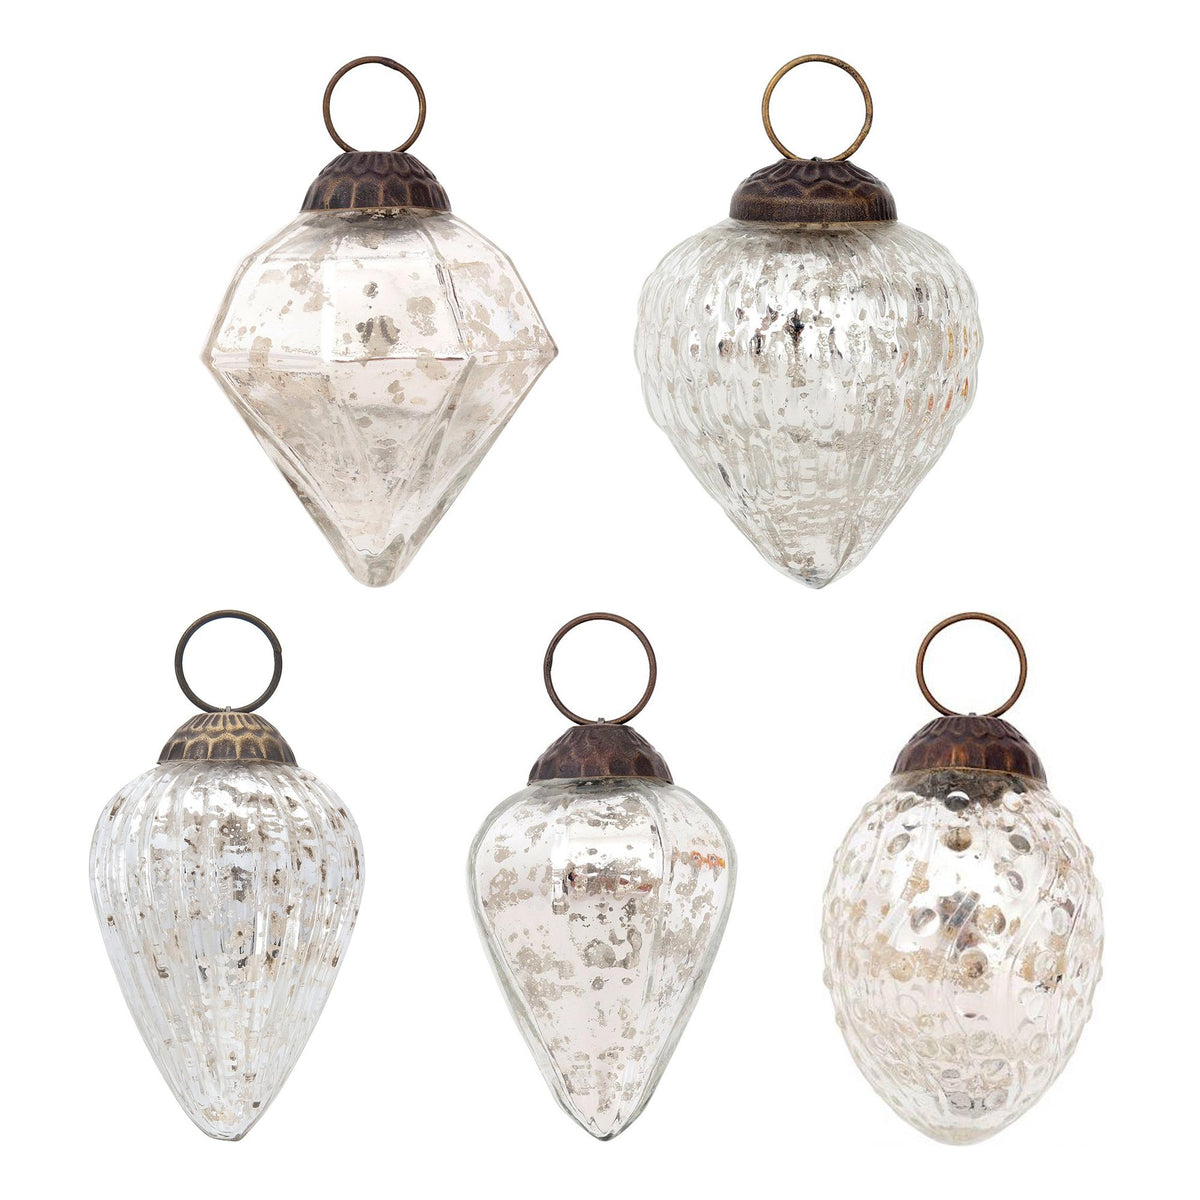 5 Pack | Silver Vintage Glam Assorted Ornaments Set - Great Gift Idea, Vintage-Style Decorations for Christmas, Special Occasions, Home Decor and Parties